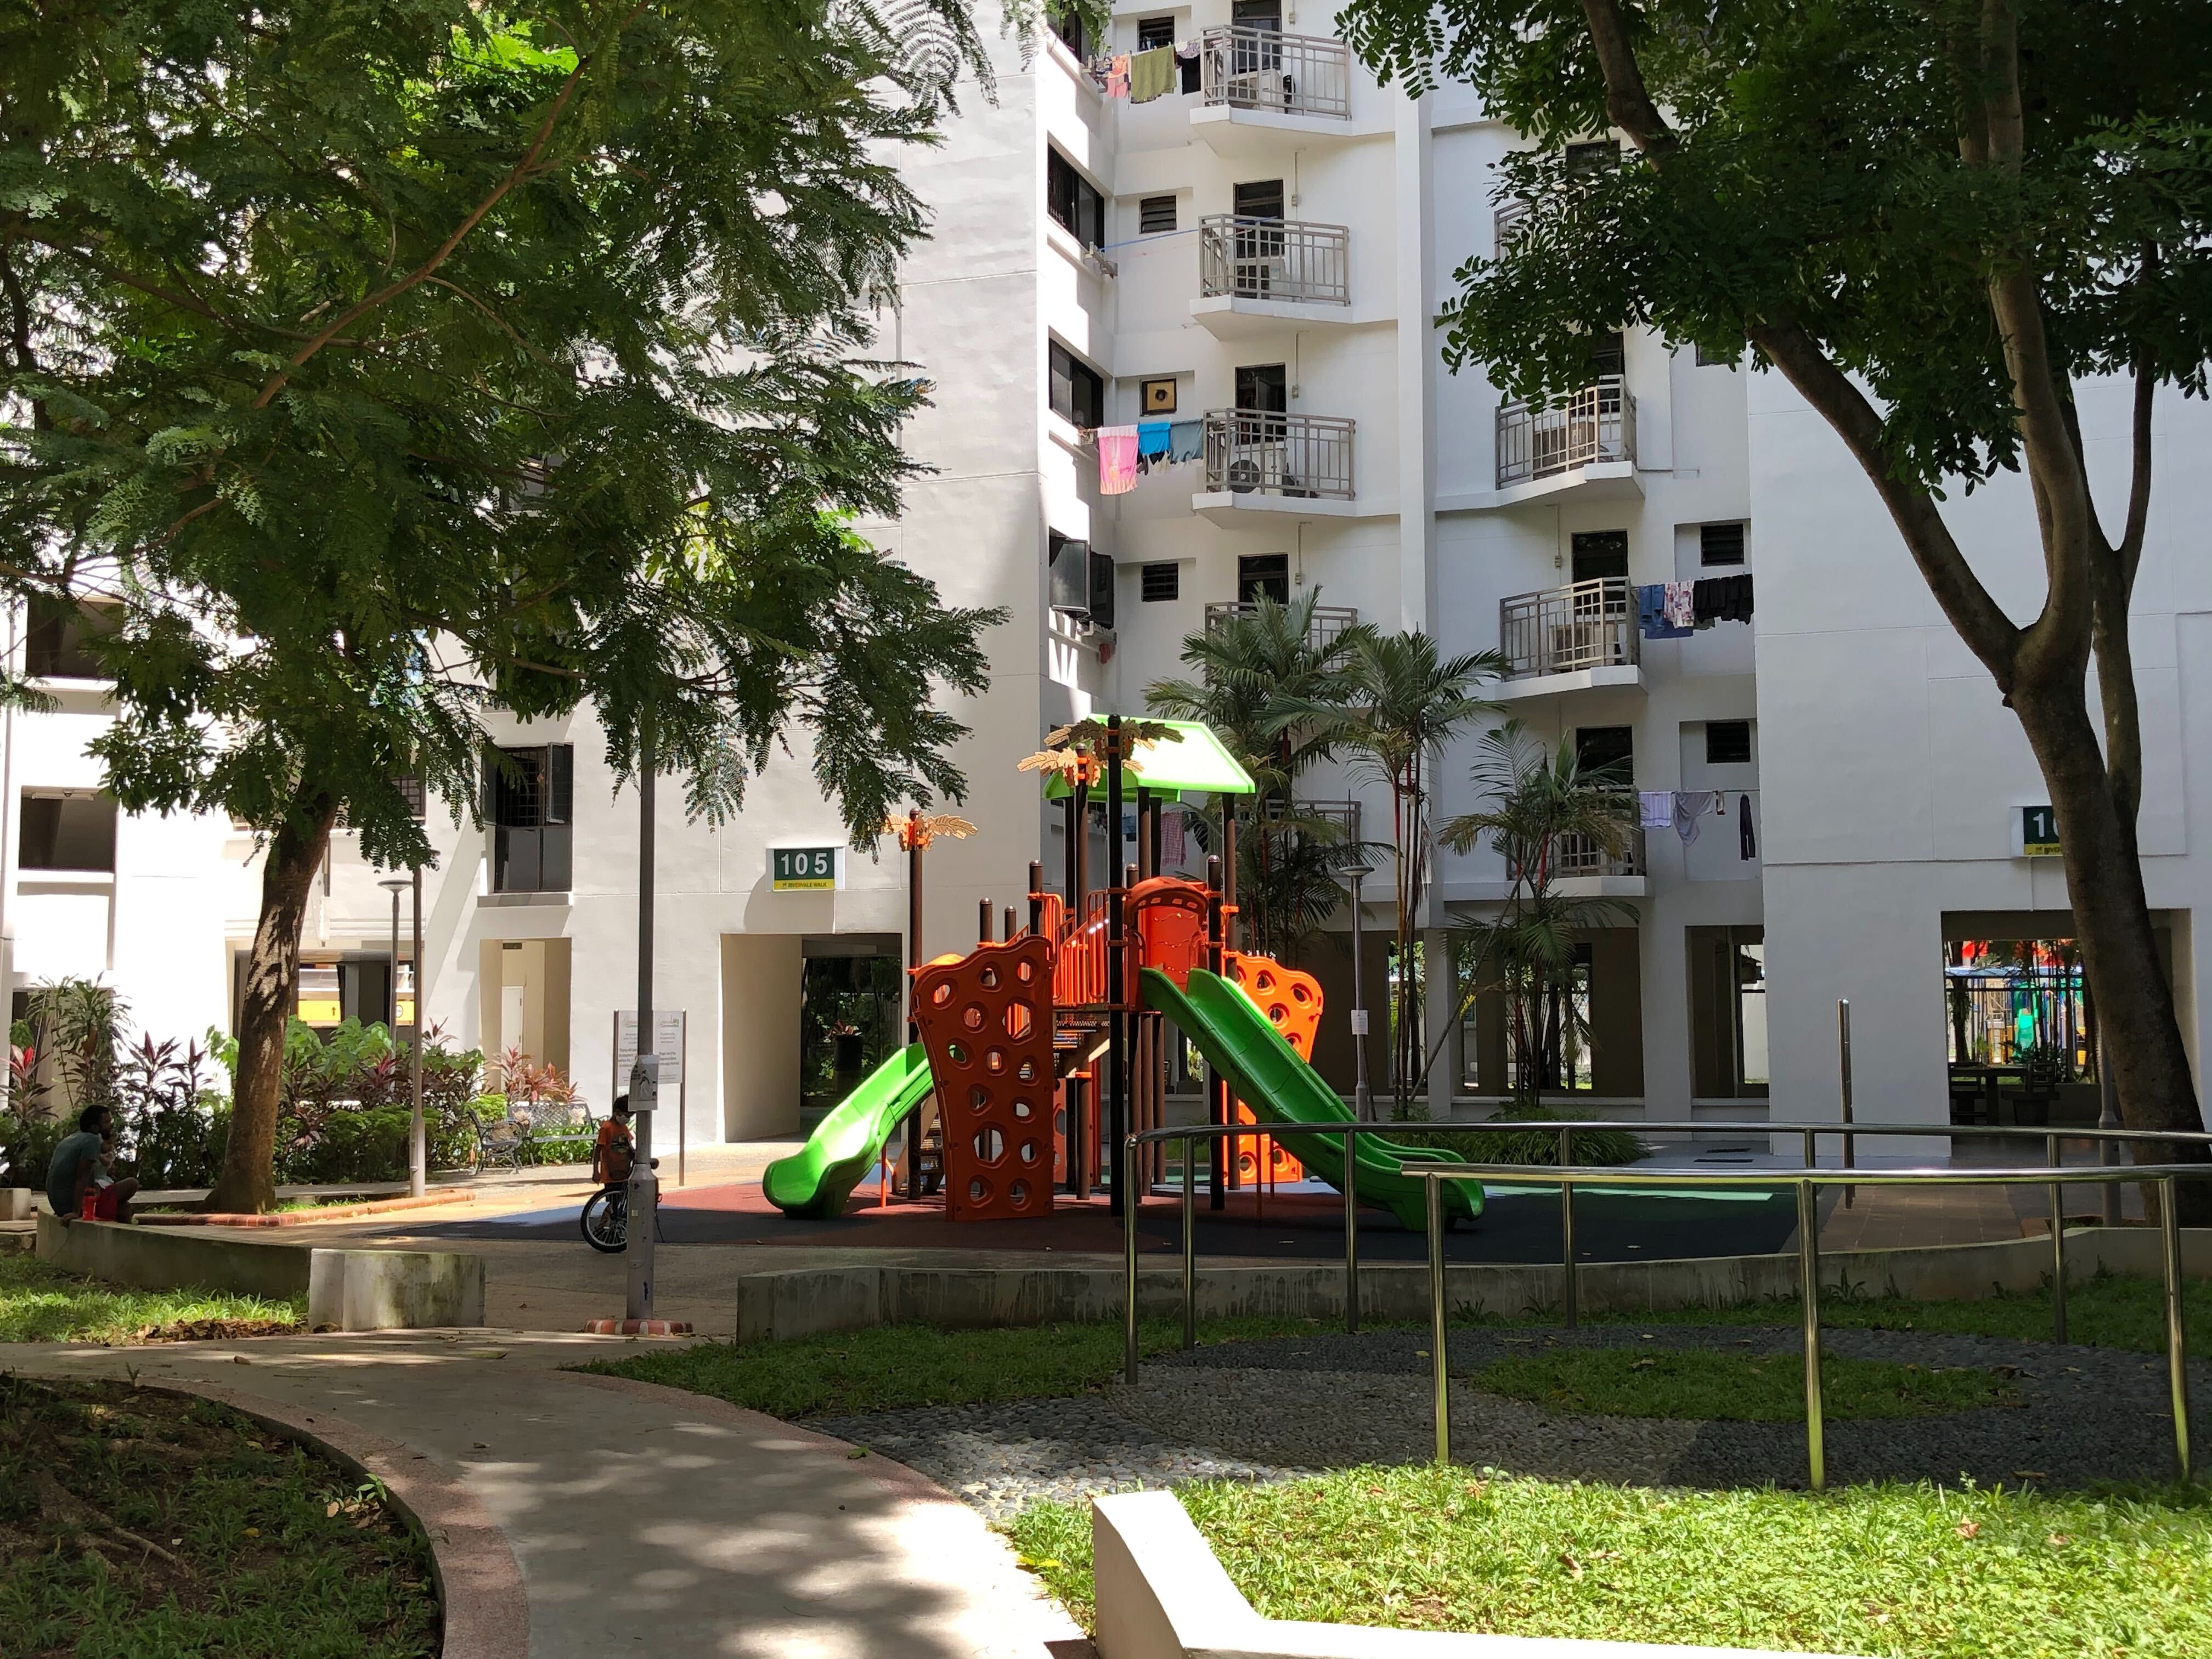 Is Sengkang All That It’s Made Out To Be? We Went For A Walk To Find Out